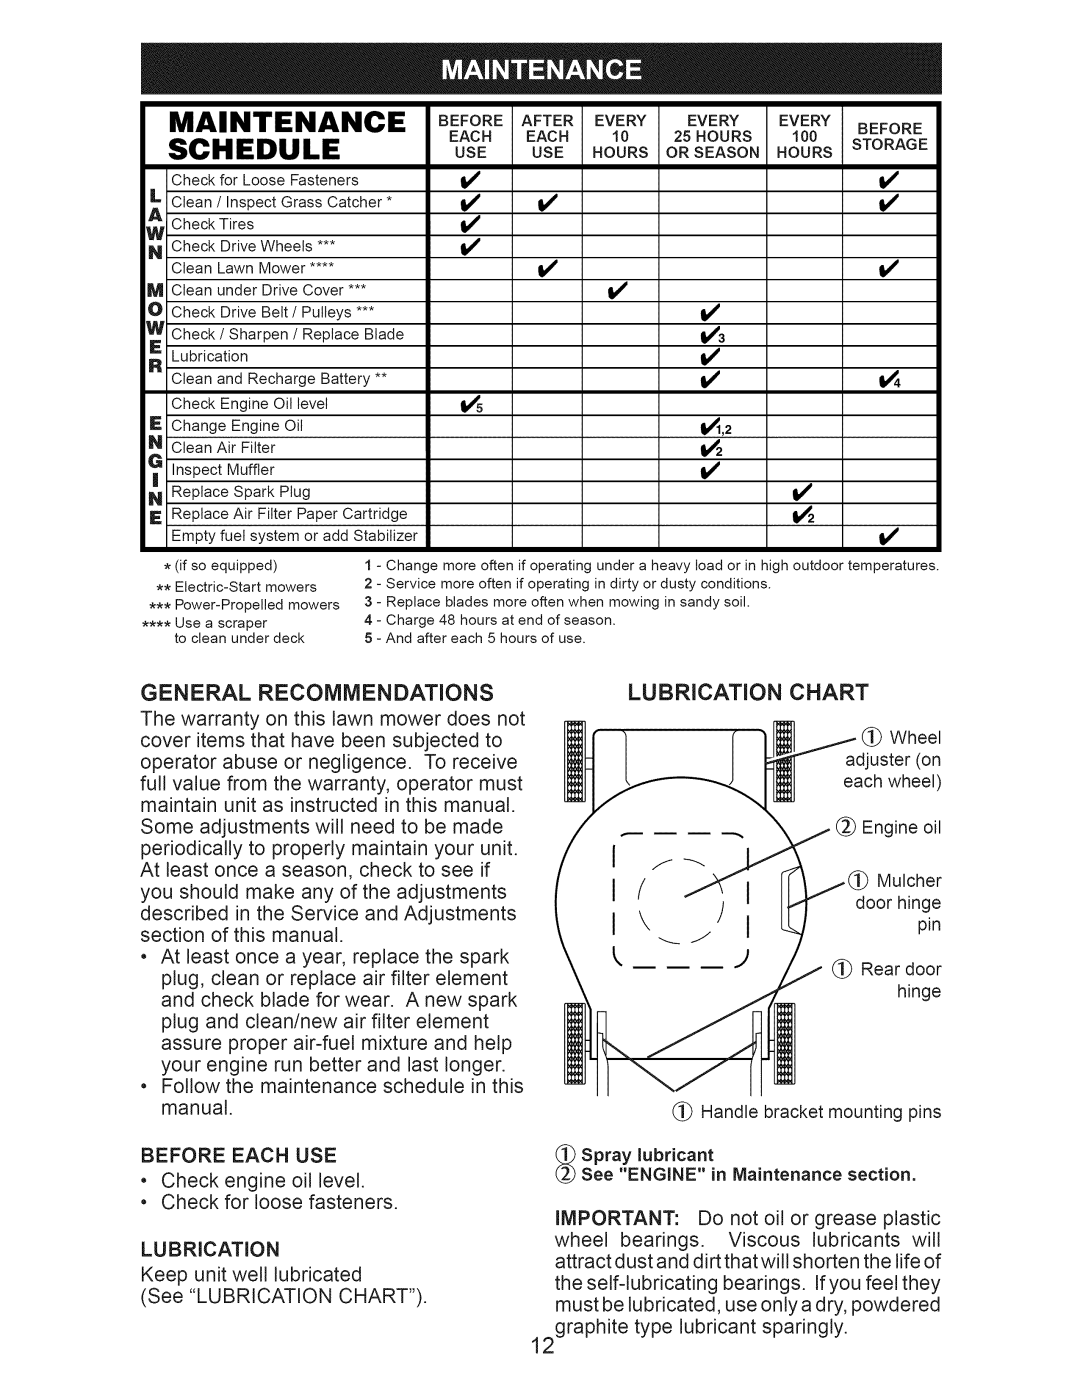 Craftsman 917.374043 owner manual Maintenance, Schedule, Use Hours 